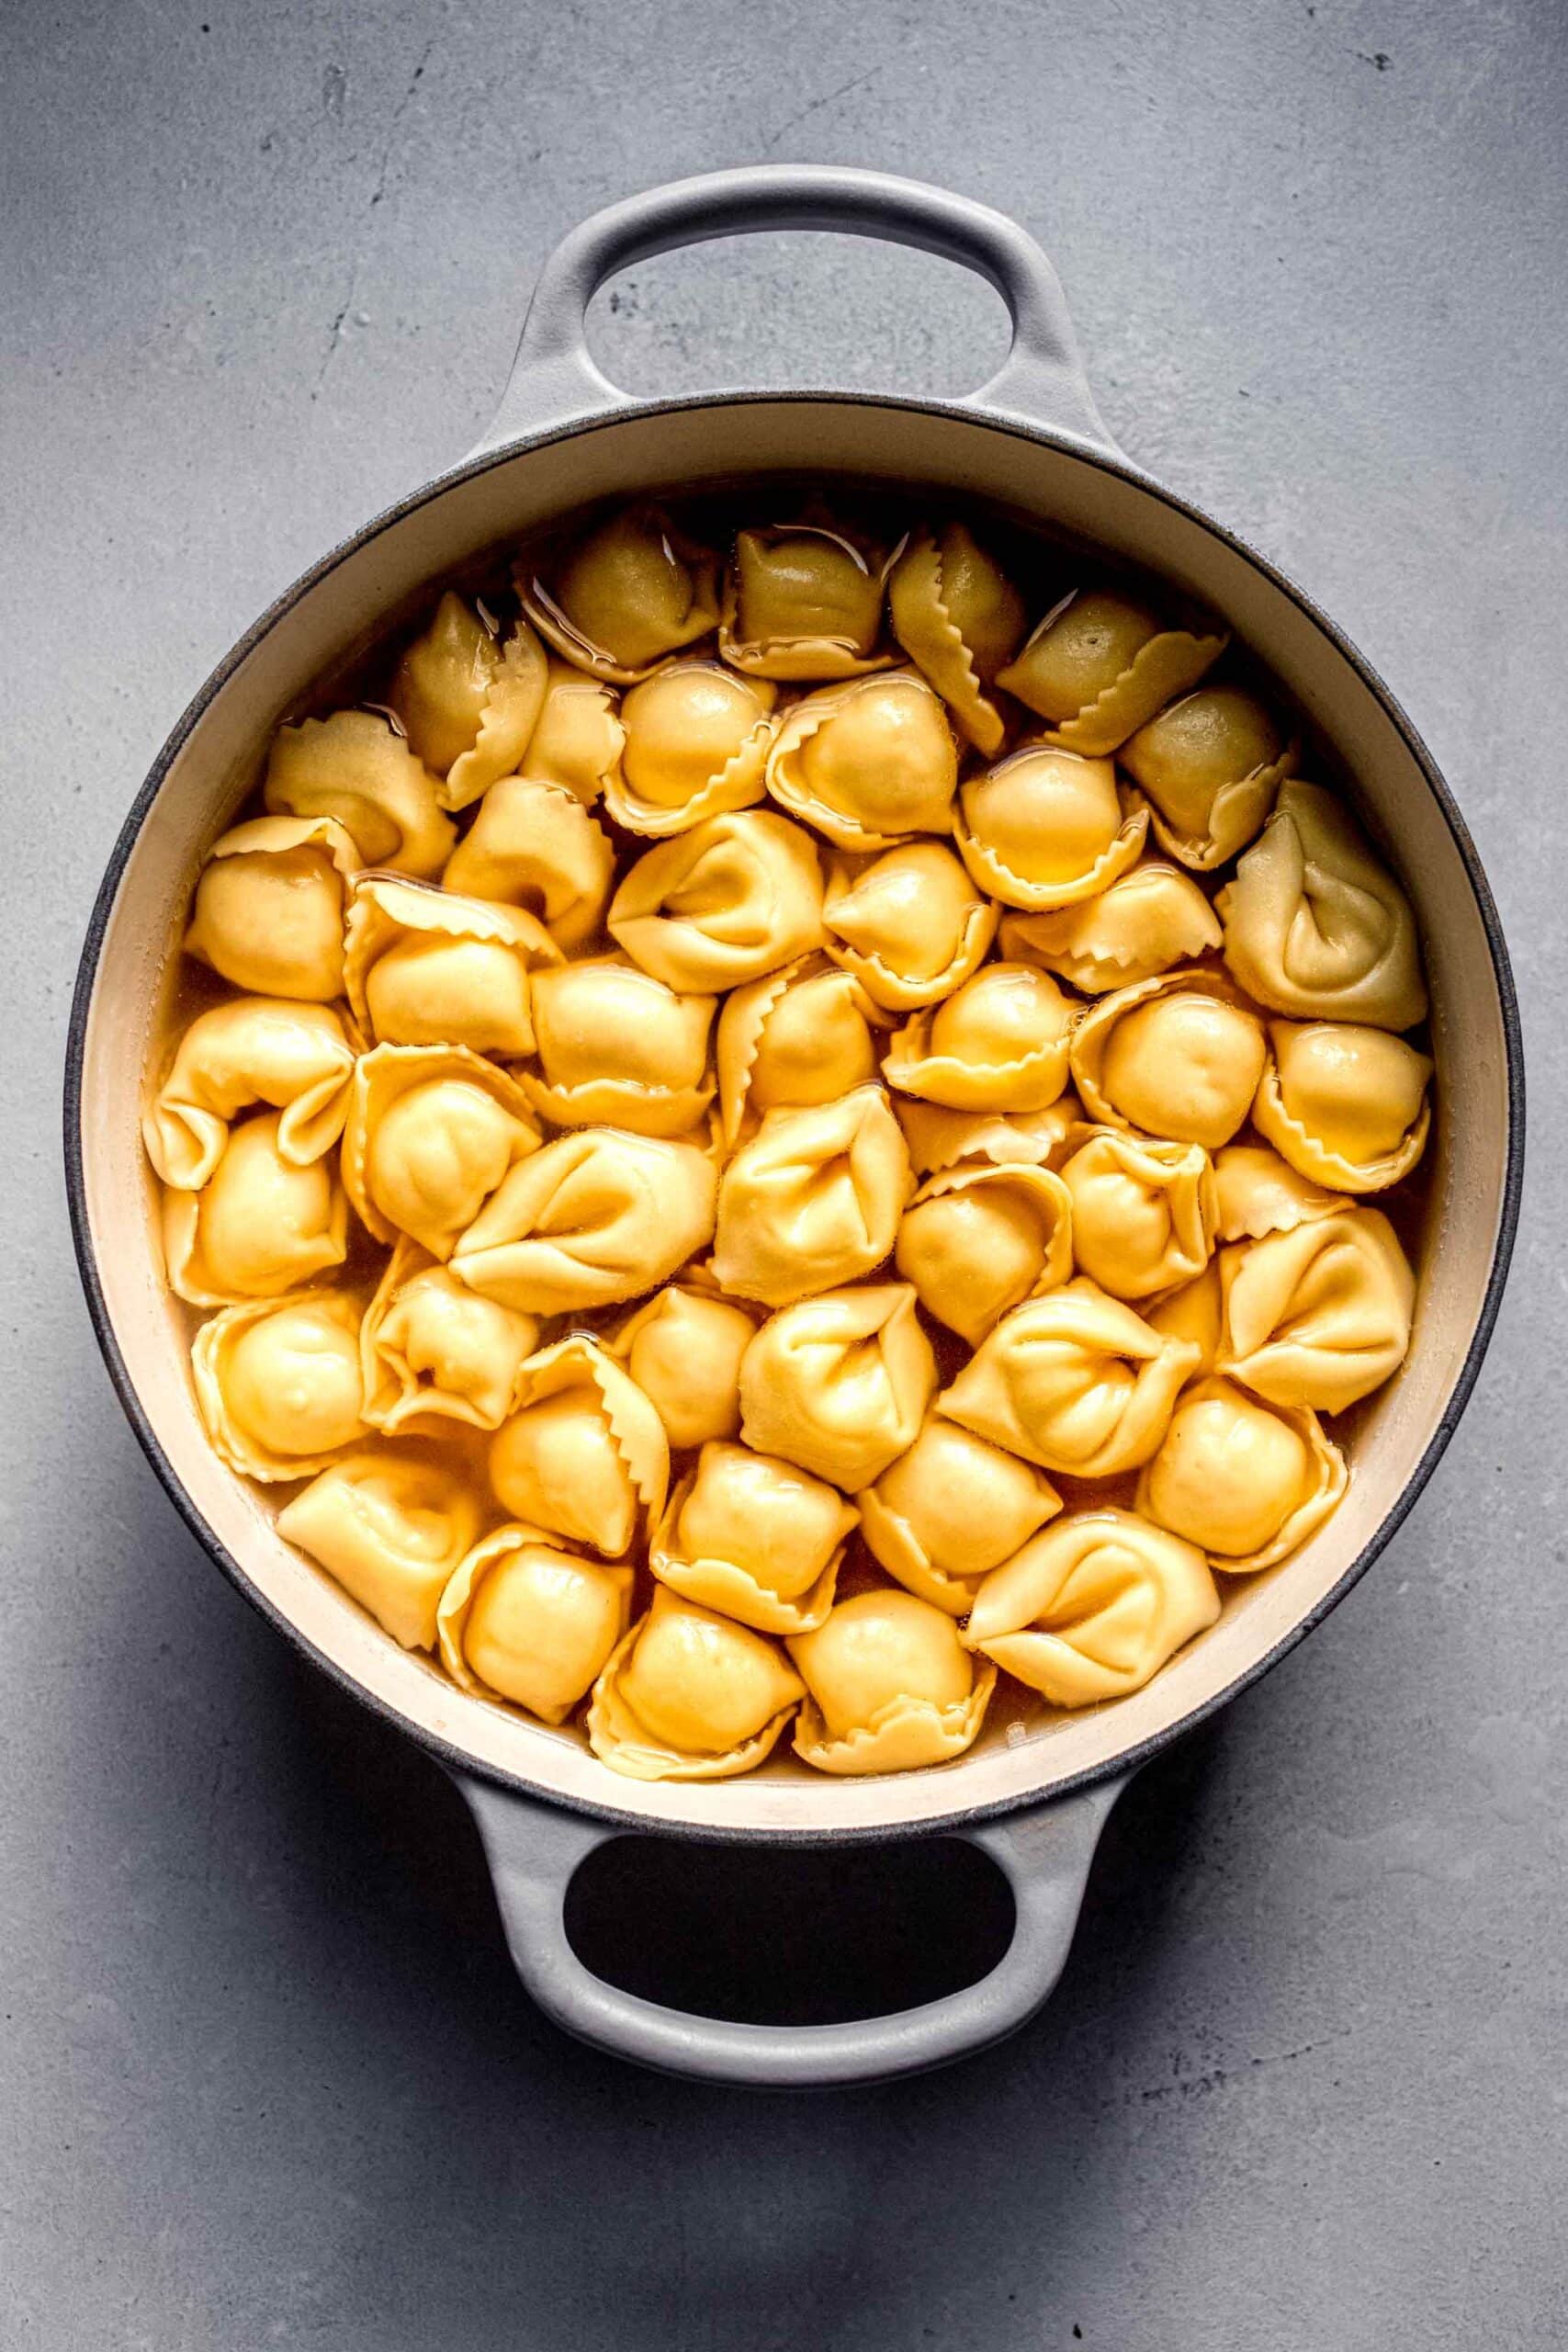 Tortellini simmered in broth. 